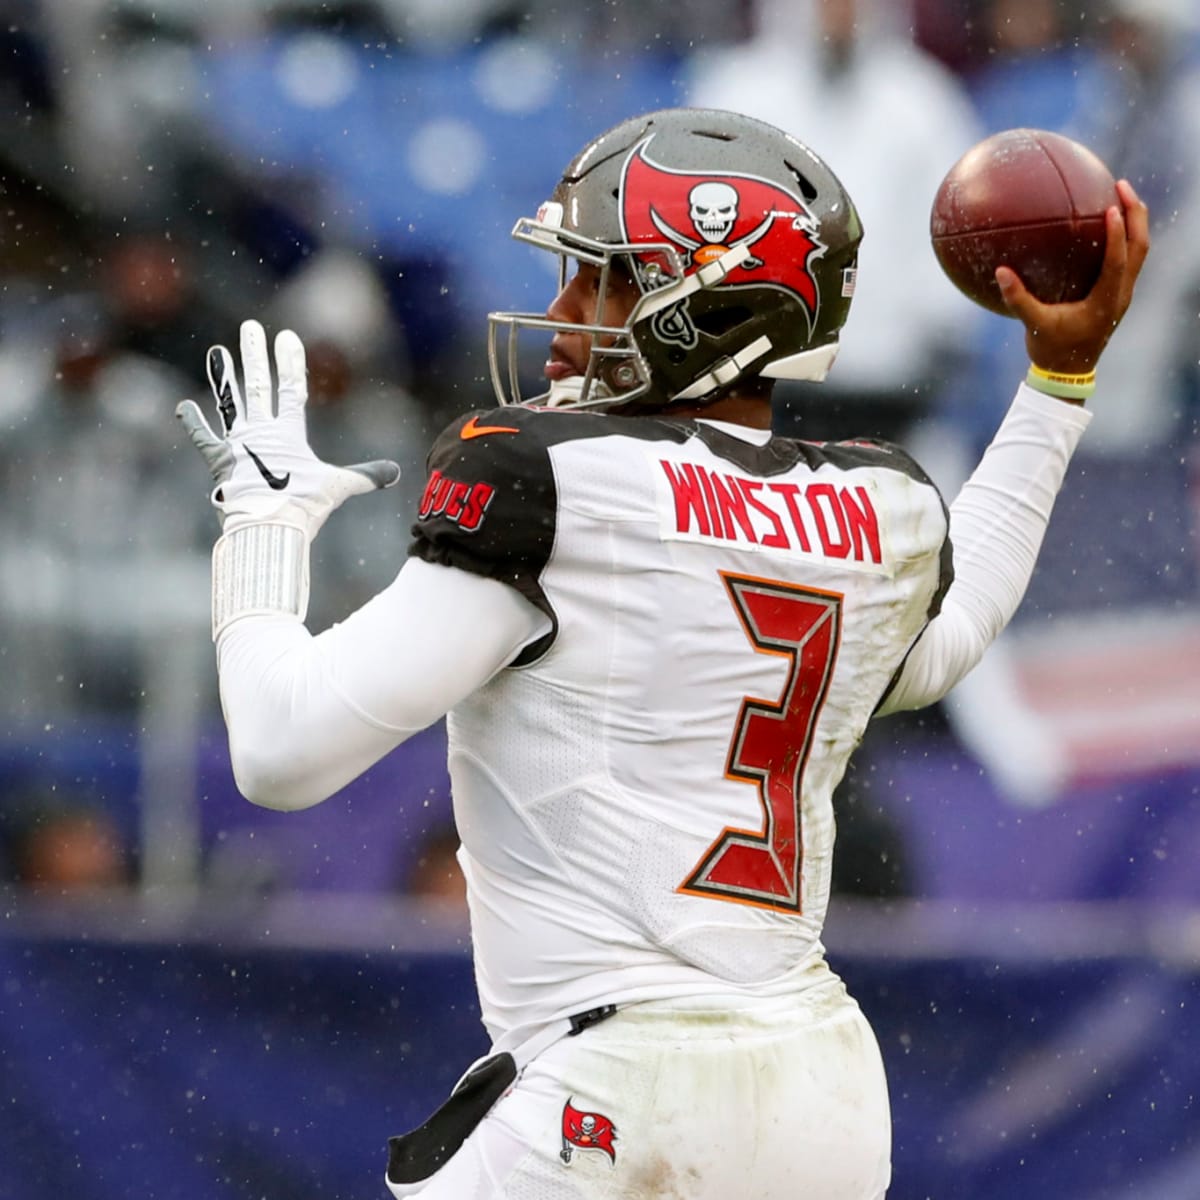 ESPN Releases 2nd Half Prediction For Bucs-Panthers - The Spun